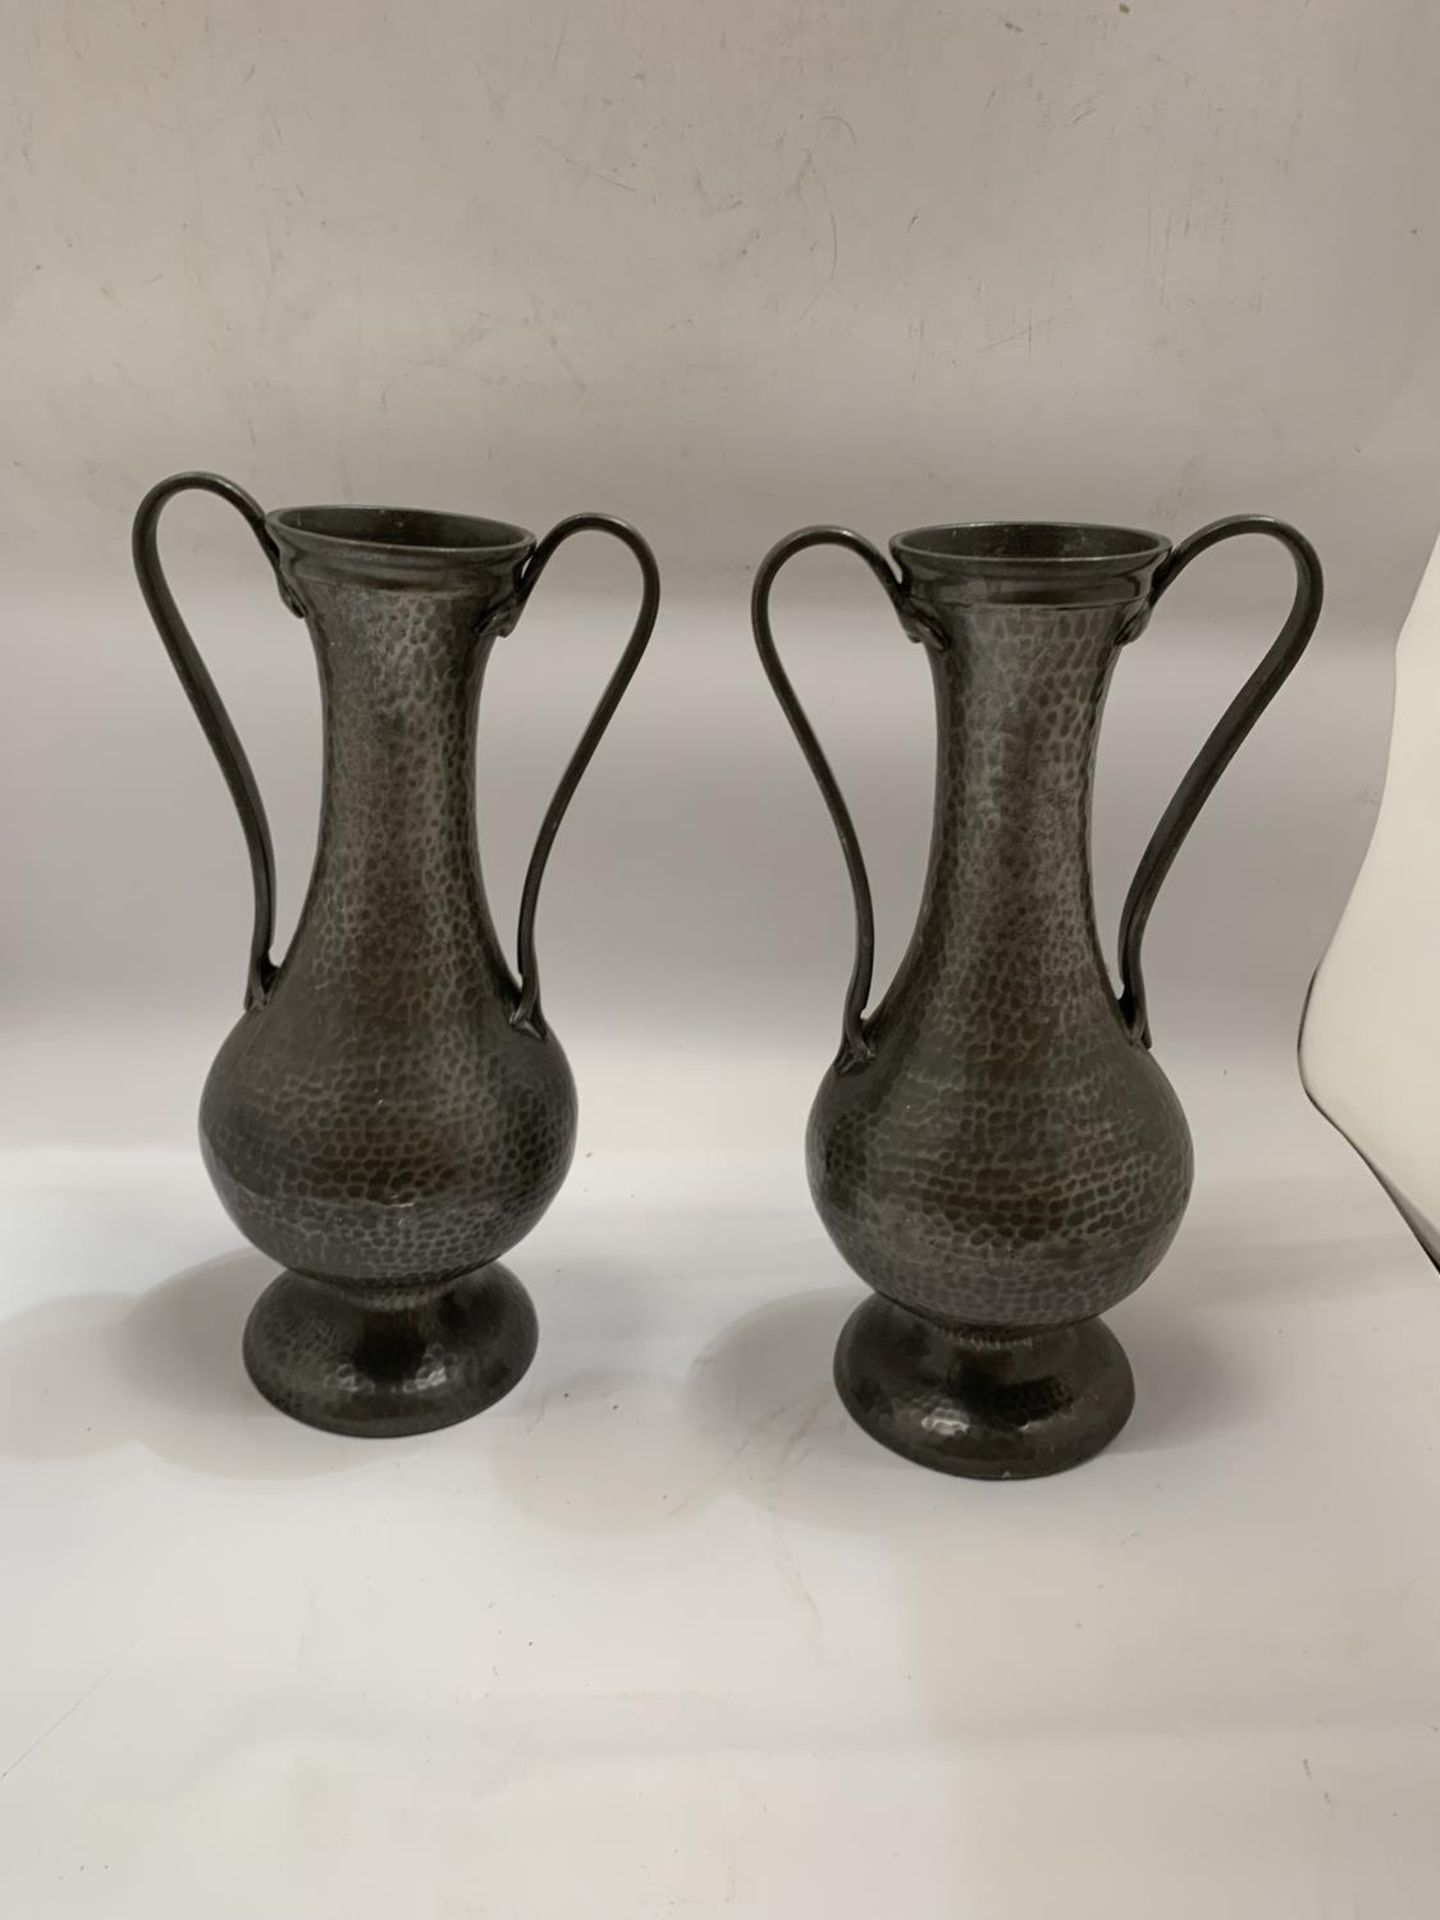 A PAIR OF ARTS AND CRAFTS STYLE TWIN HANDLED PEWTER VASES